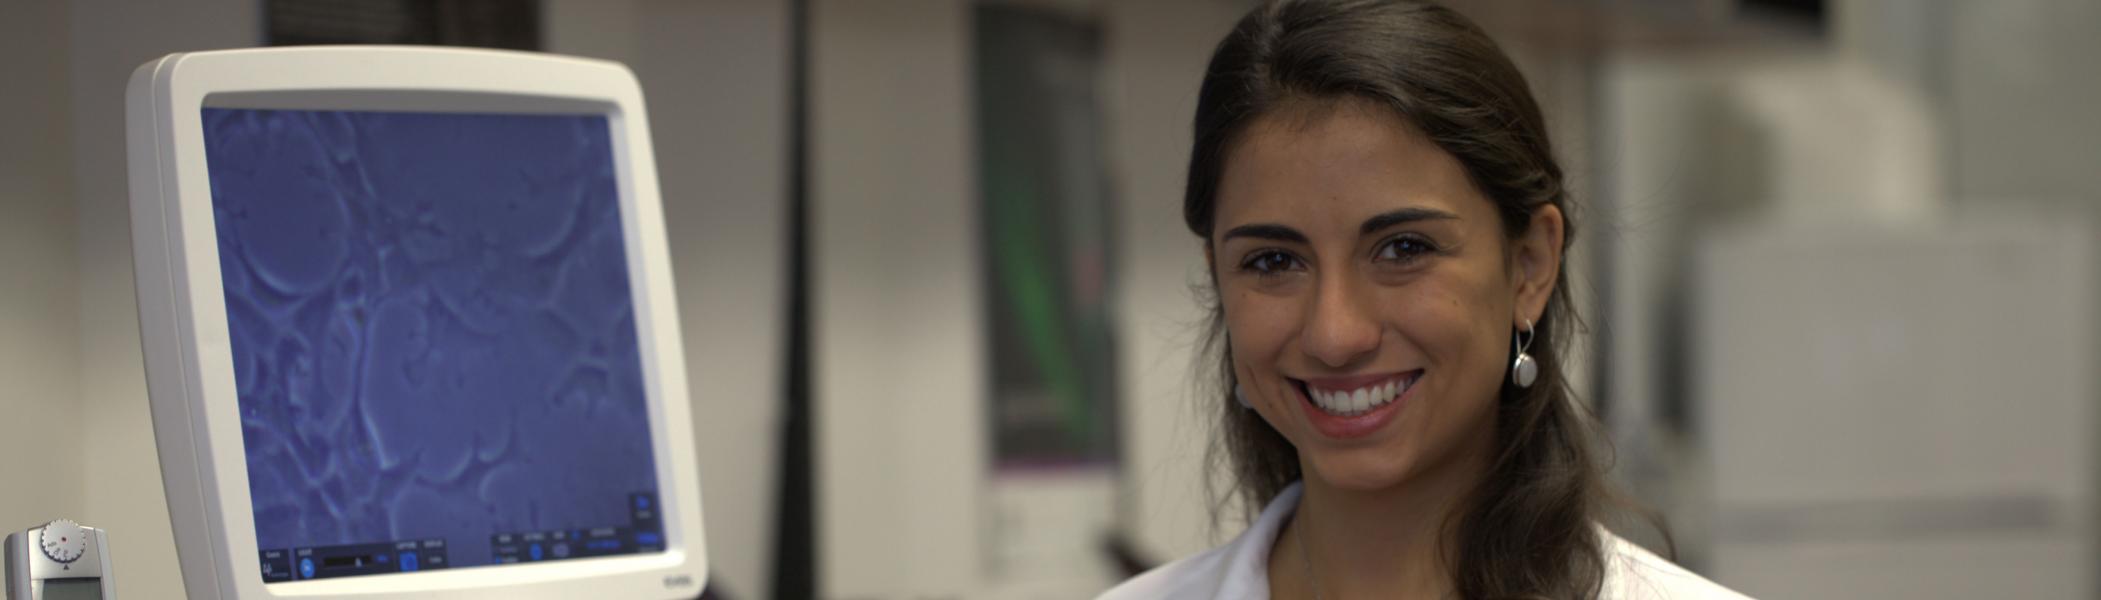 Student in lab smiling into camera